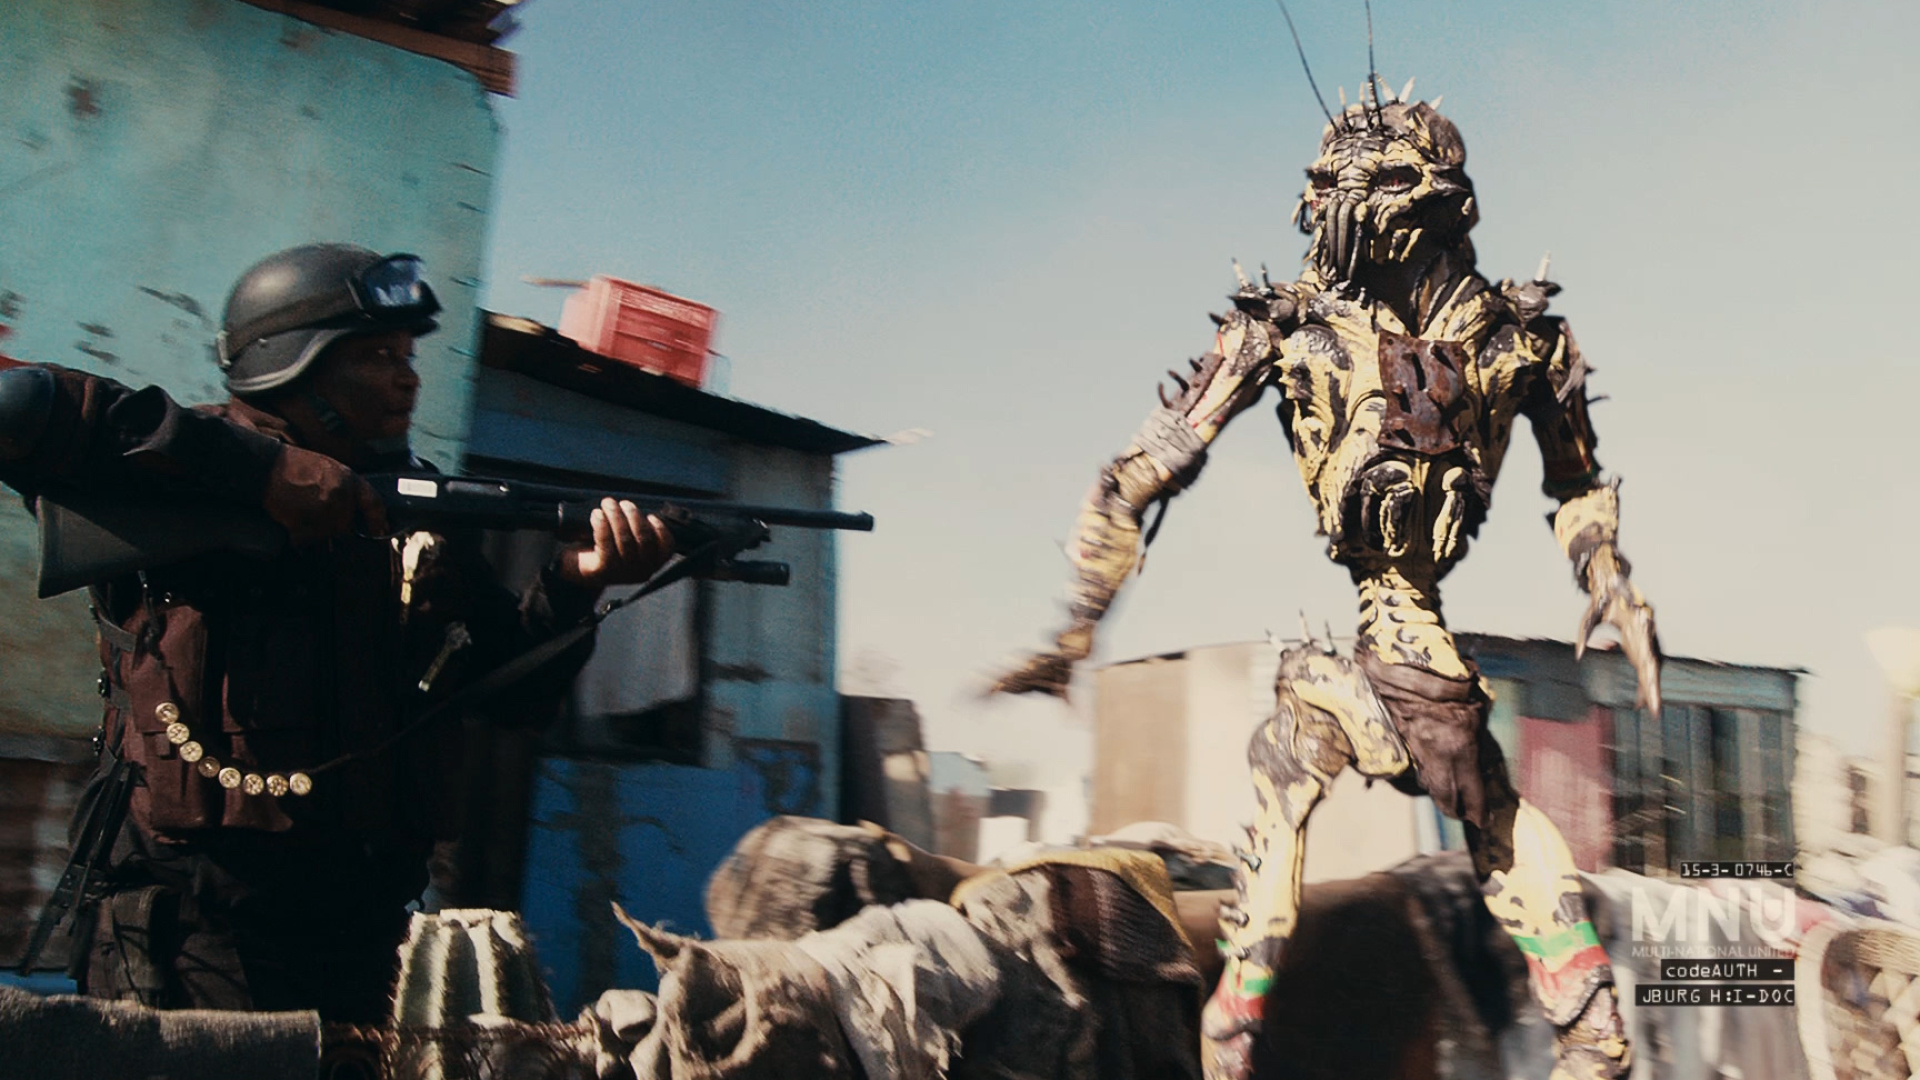 District 9: A science fiction-found footage drama set in Johannesburg, South Africa. 1920x1080 Full HD Wallpaper.